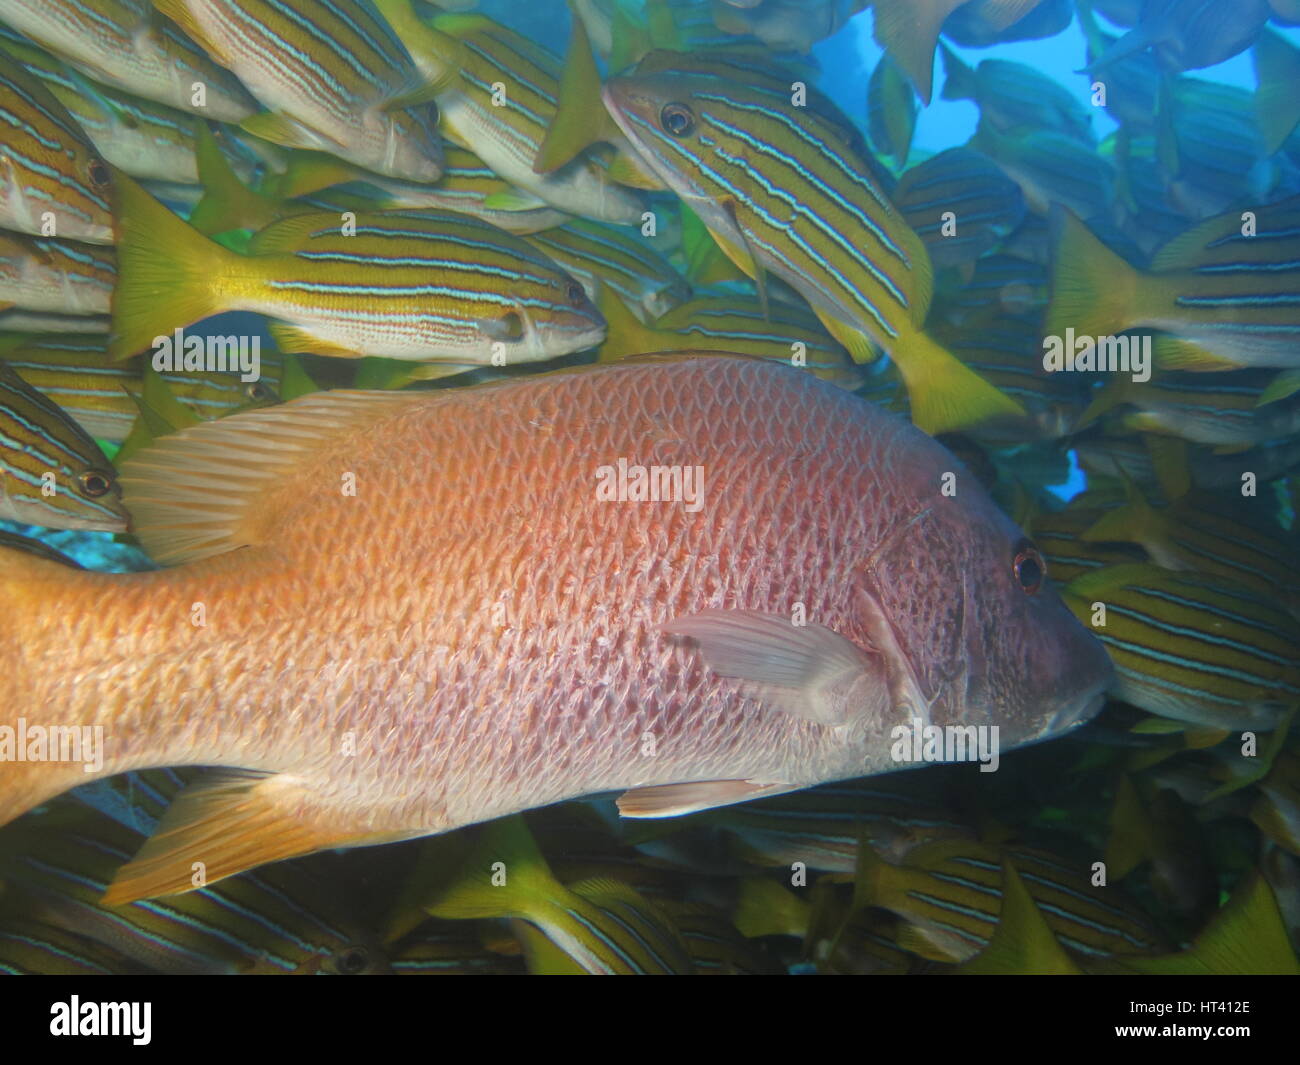 2 different snapper species, Cocos island Stock Photo